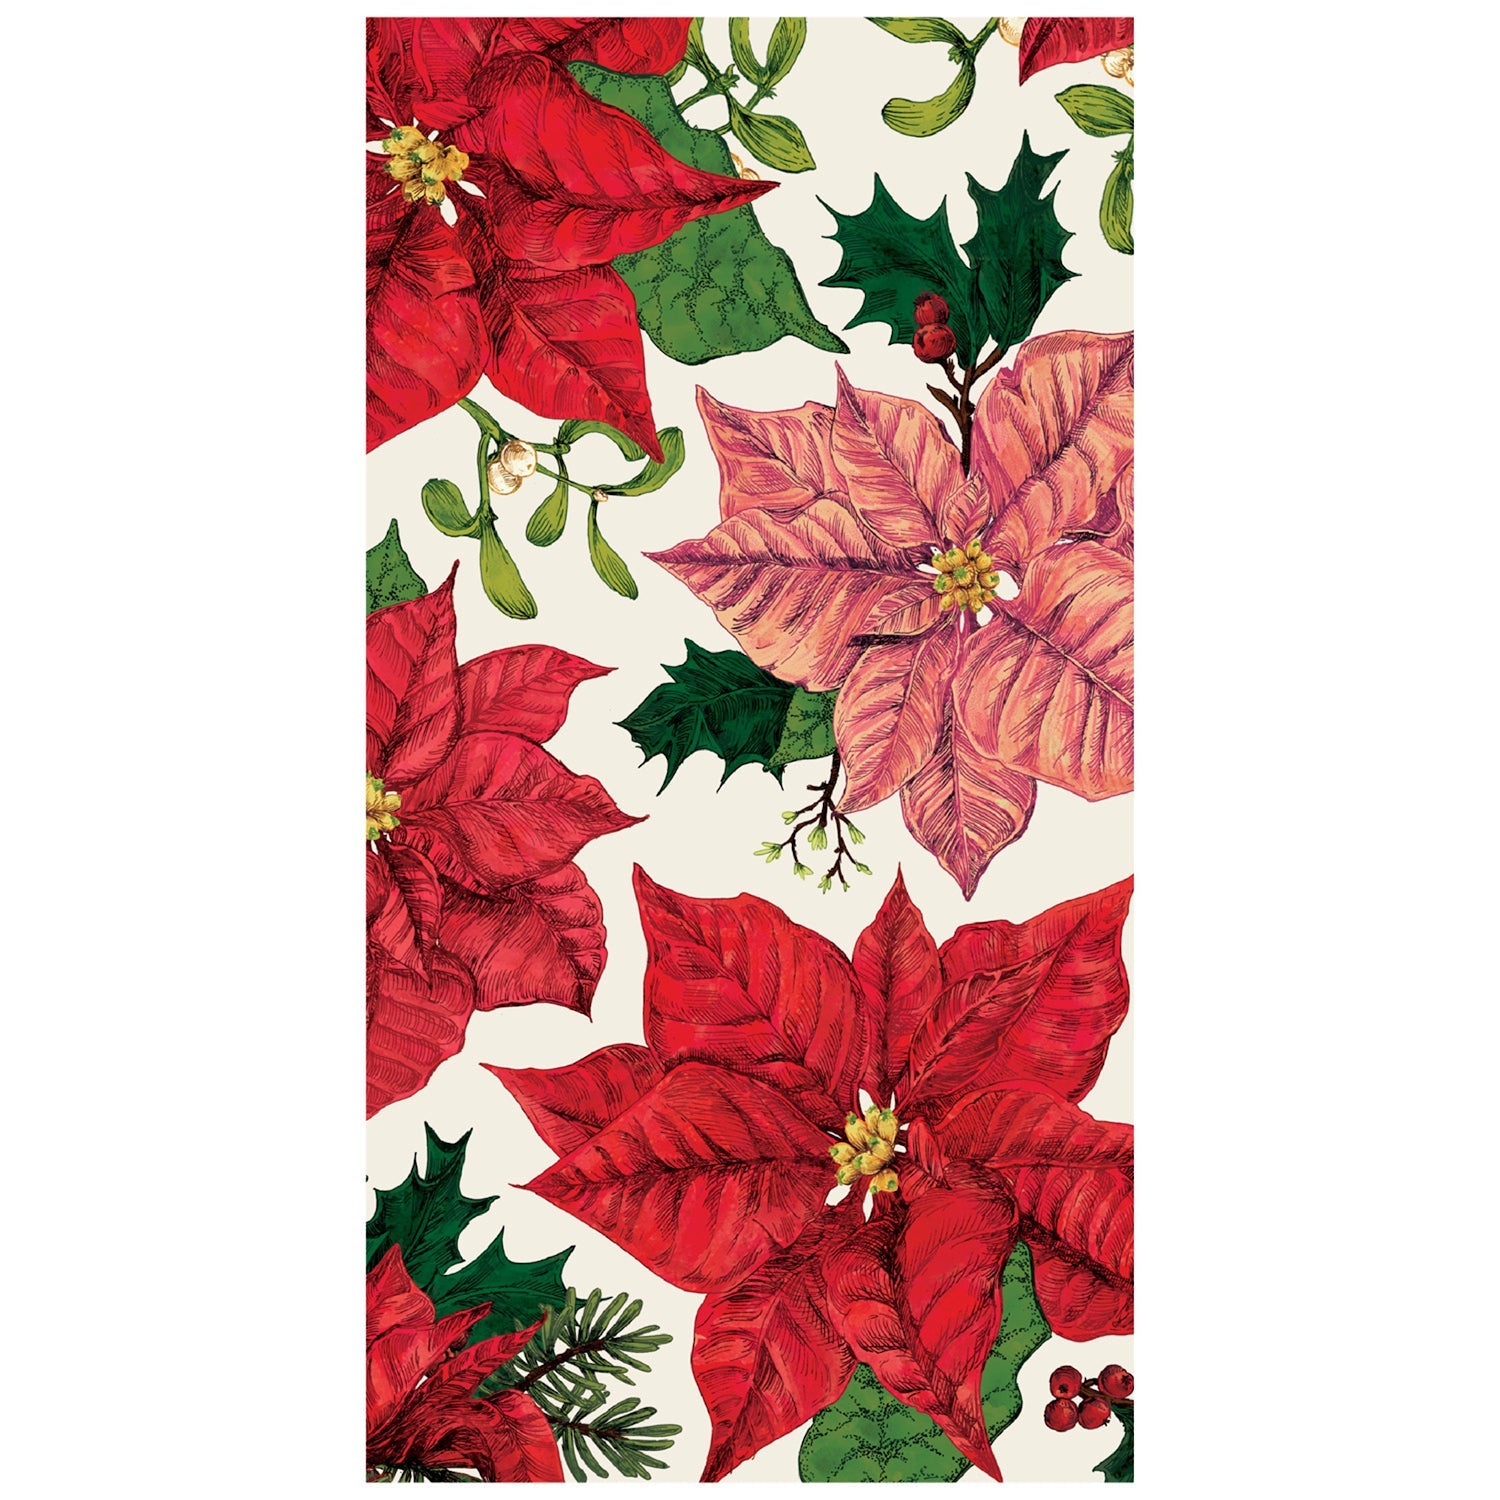 A rectangle, cream guest napkin featuring vintage-style illustrated poinsettias in red and pink, surrounded by winter foliage like holly and mistletoe.